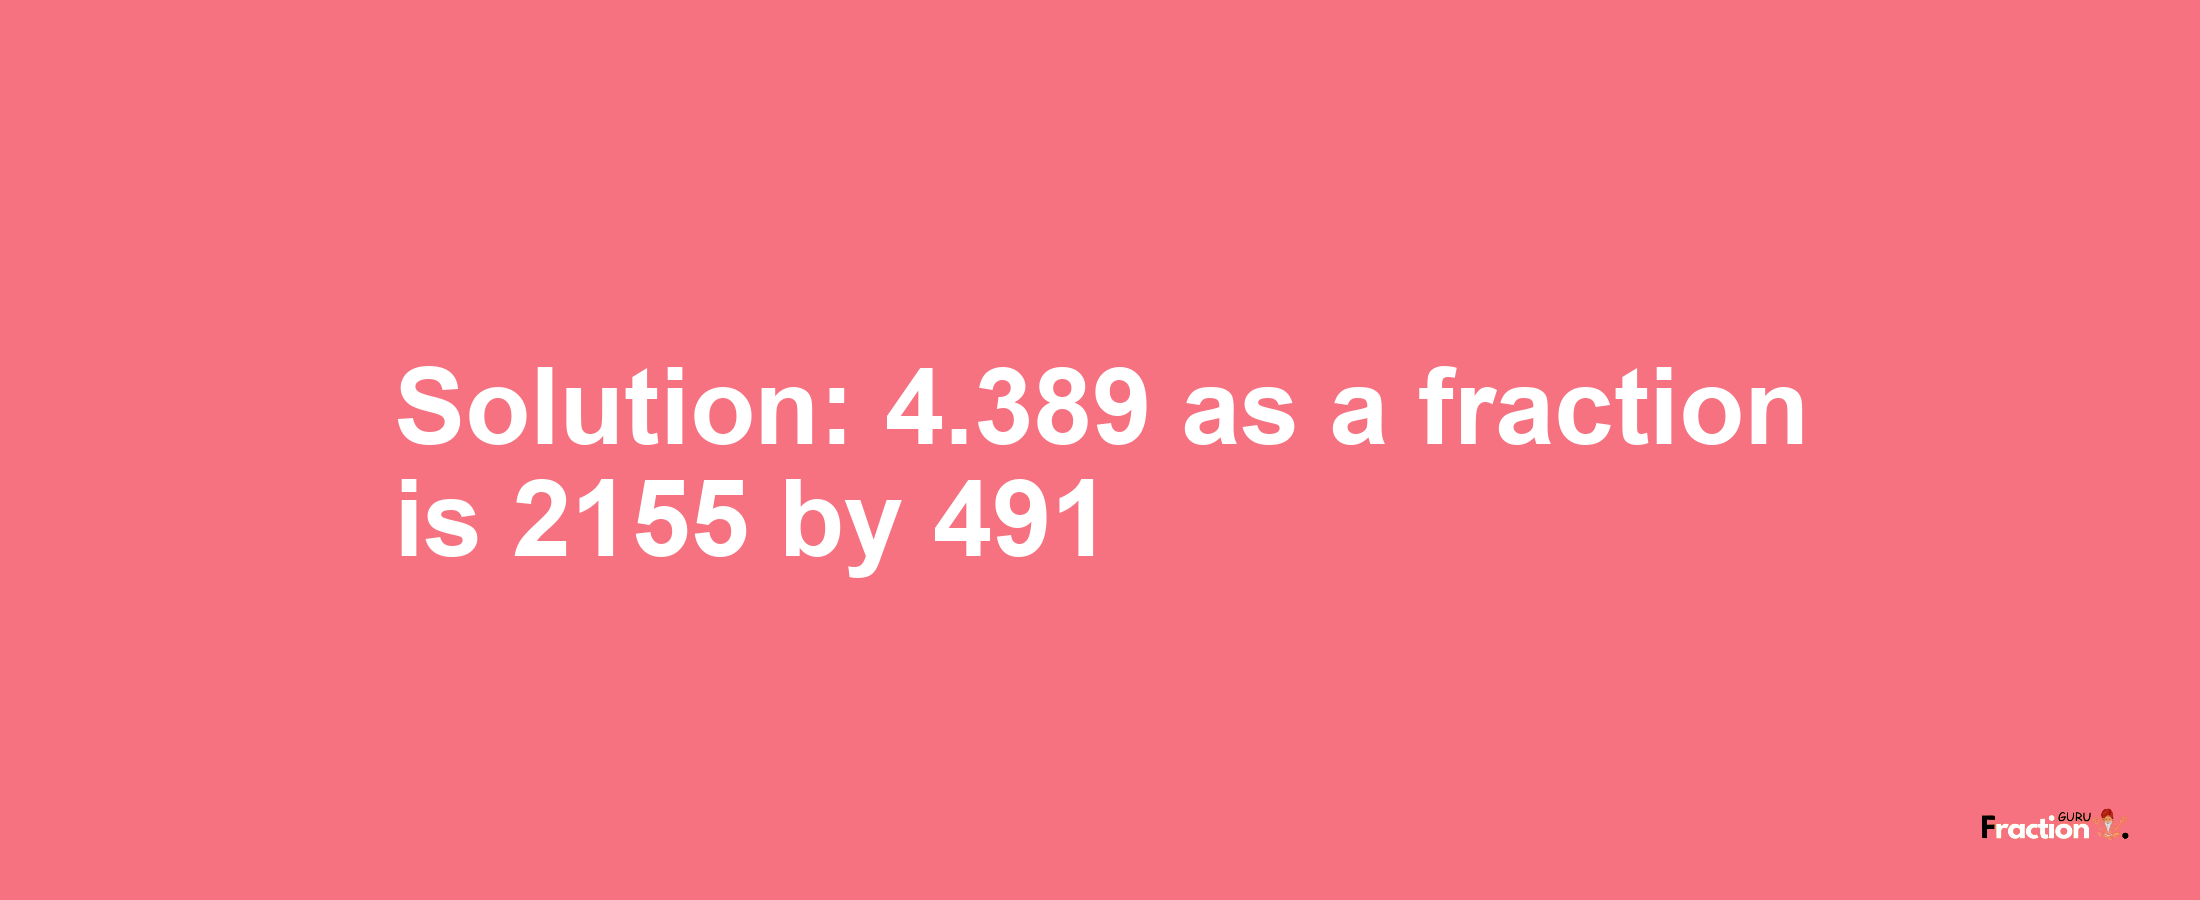 Solution:4.389 as a fraction is 2155/491